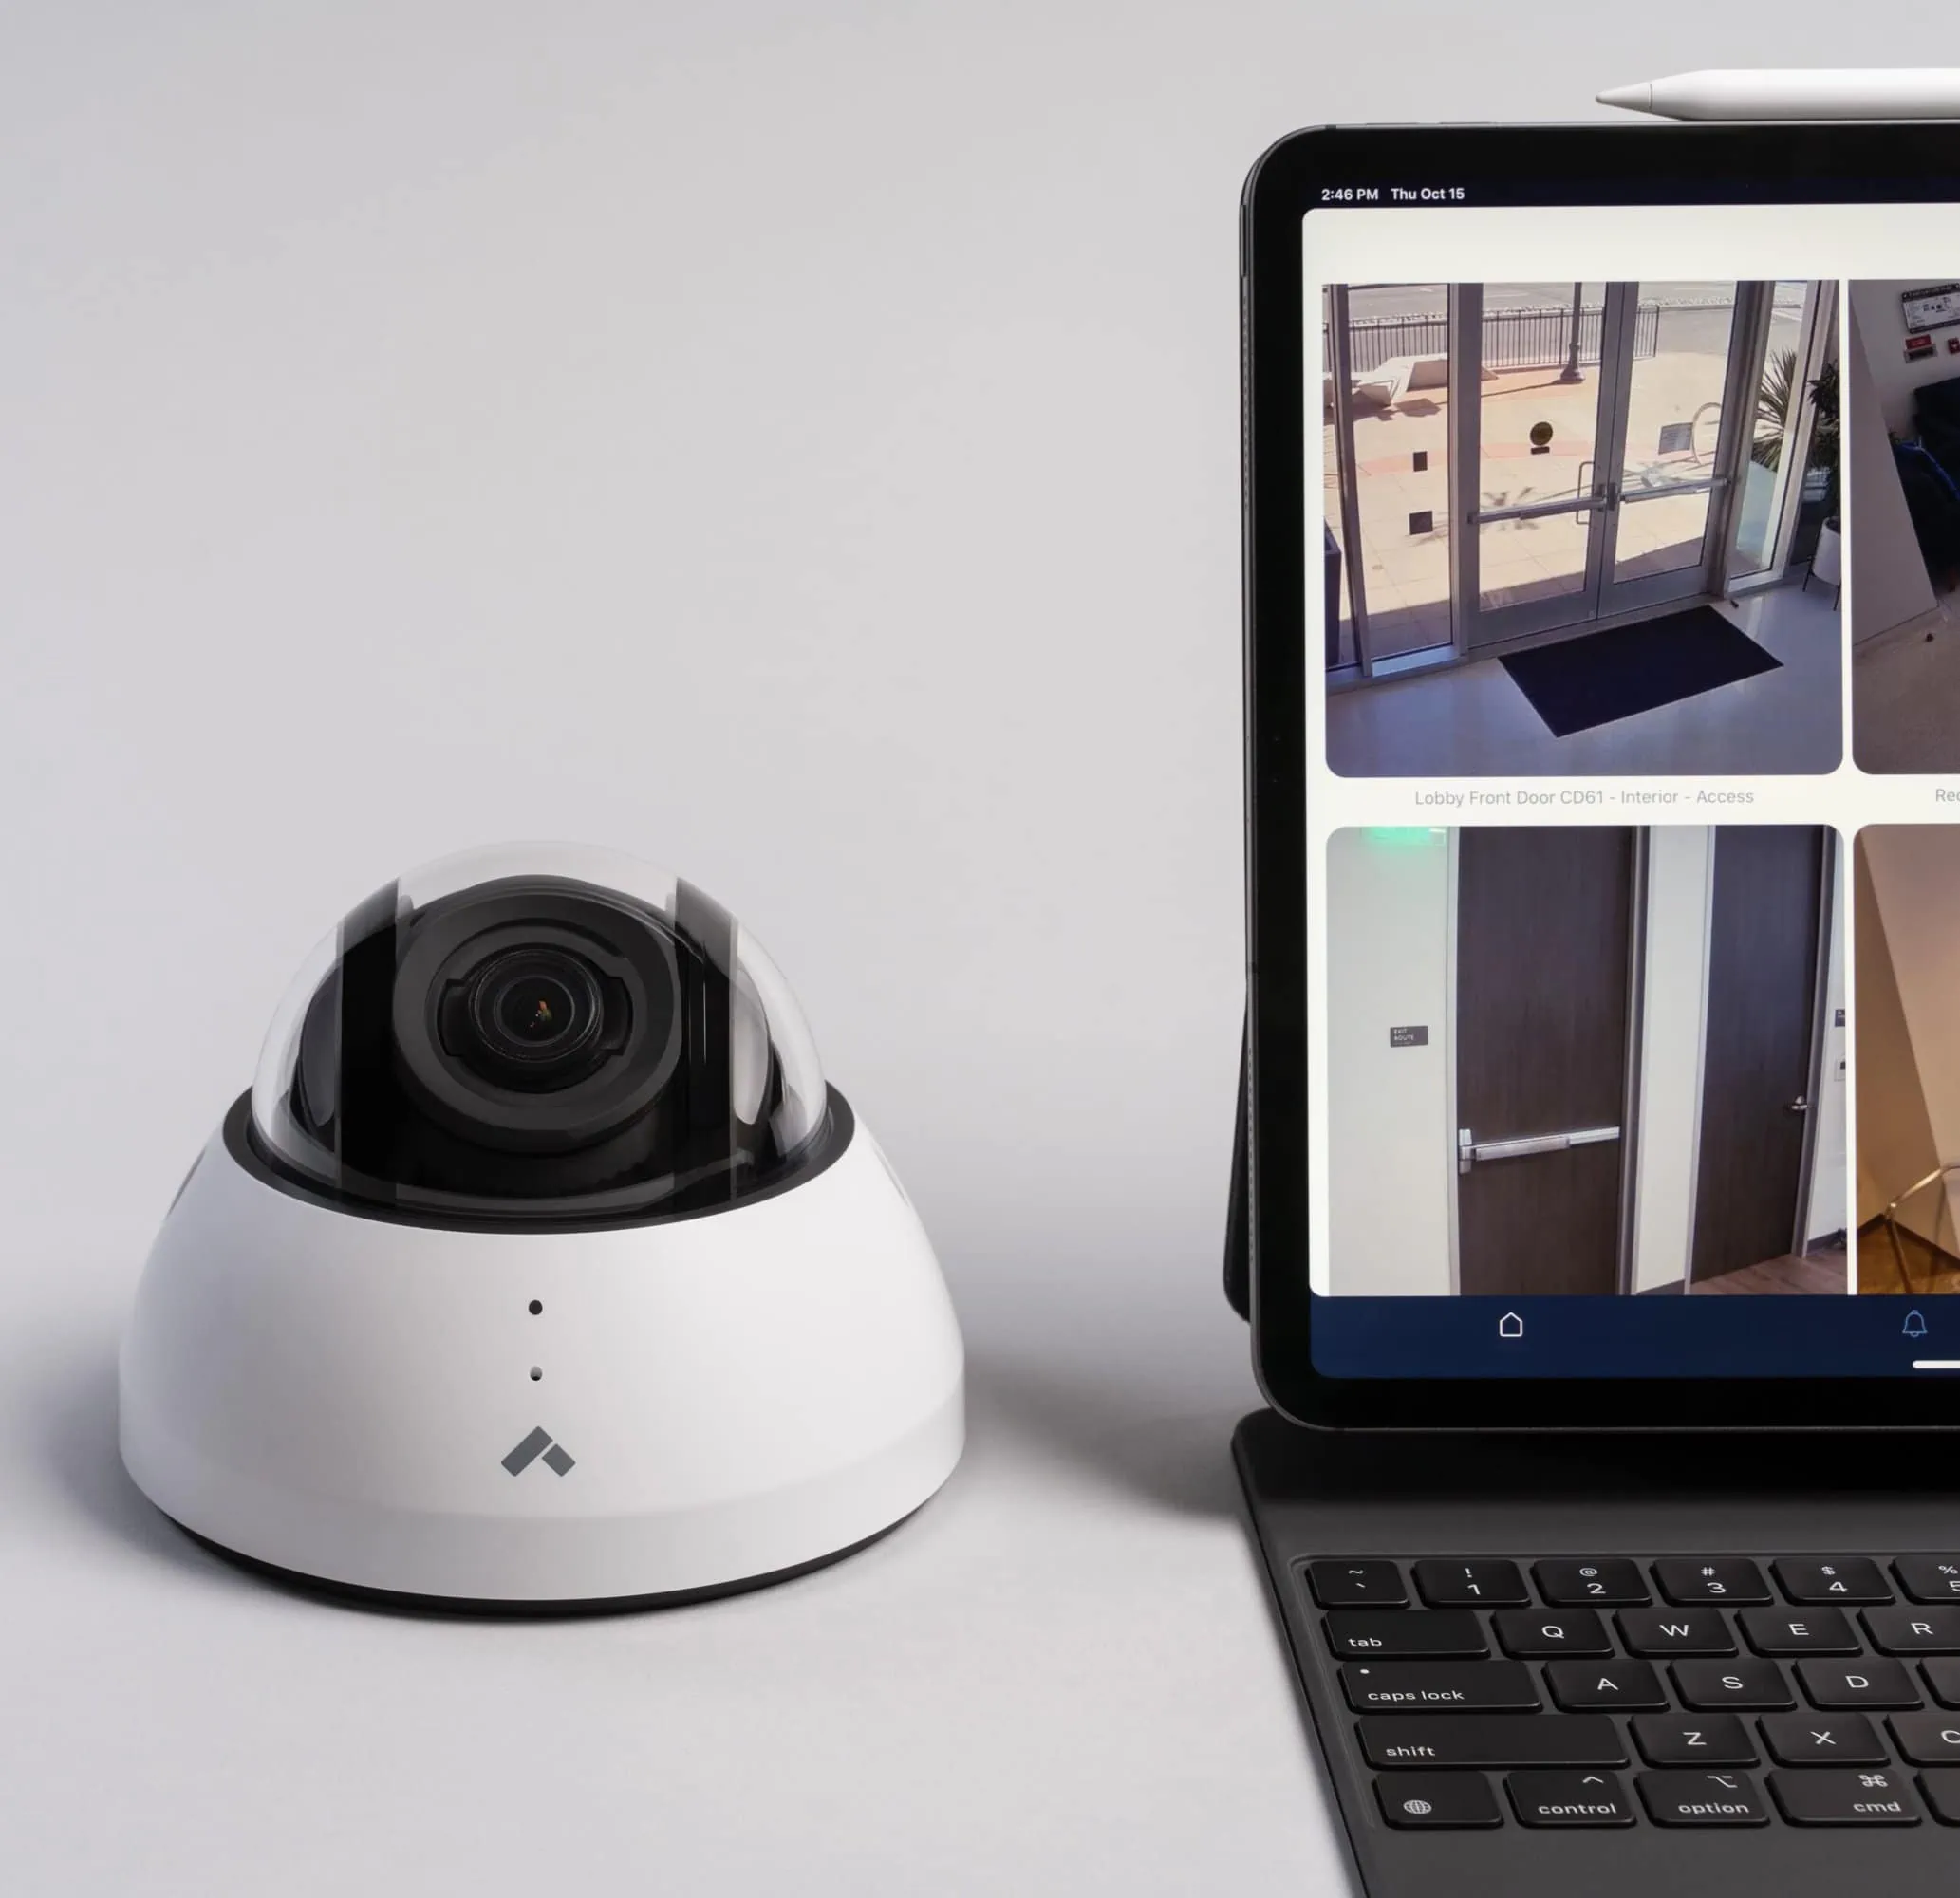 Dome security camera next to laptop displaying footage from building security system